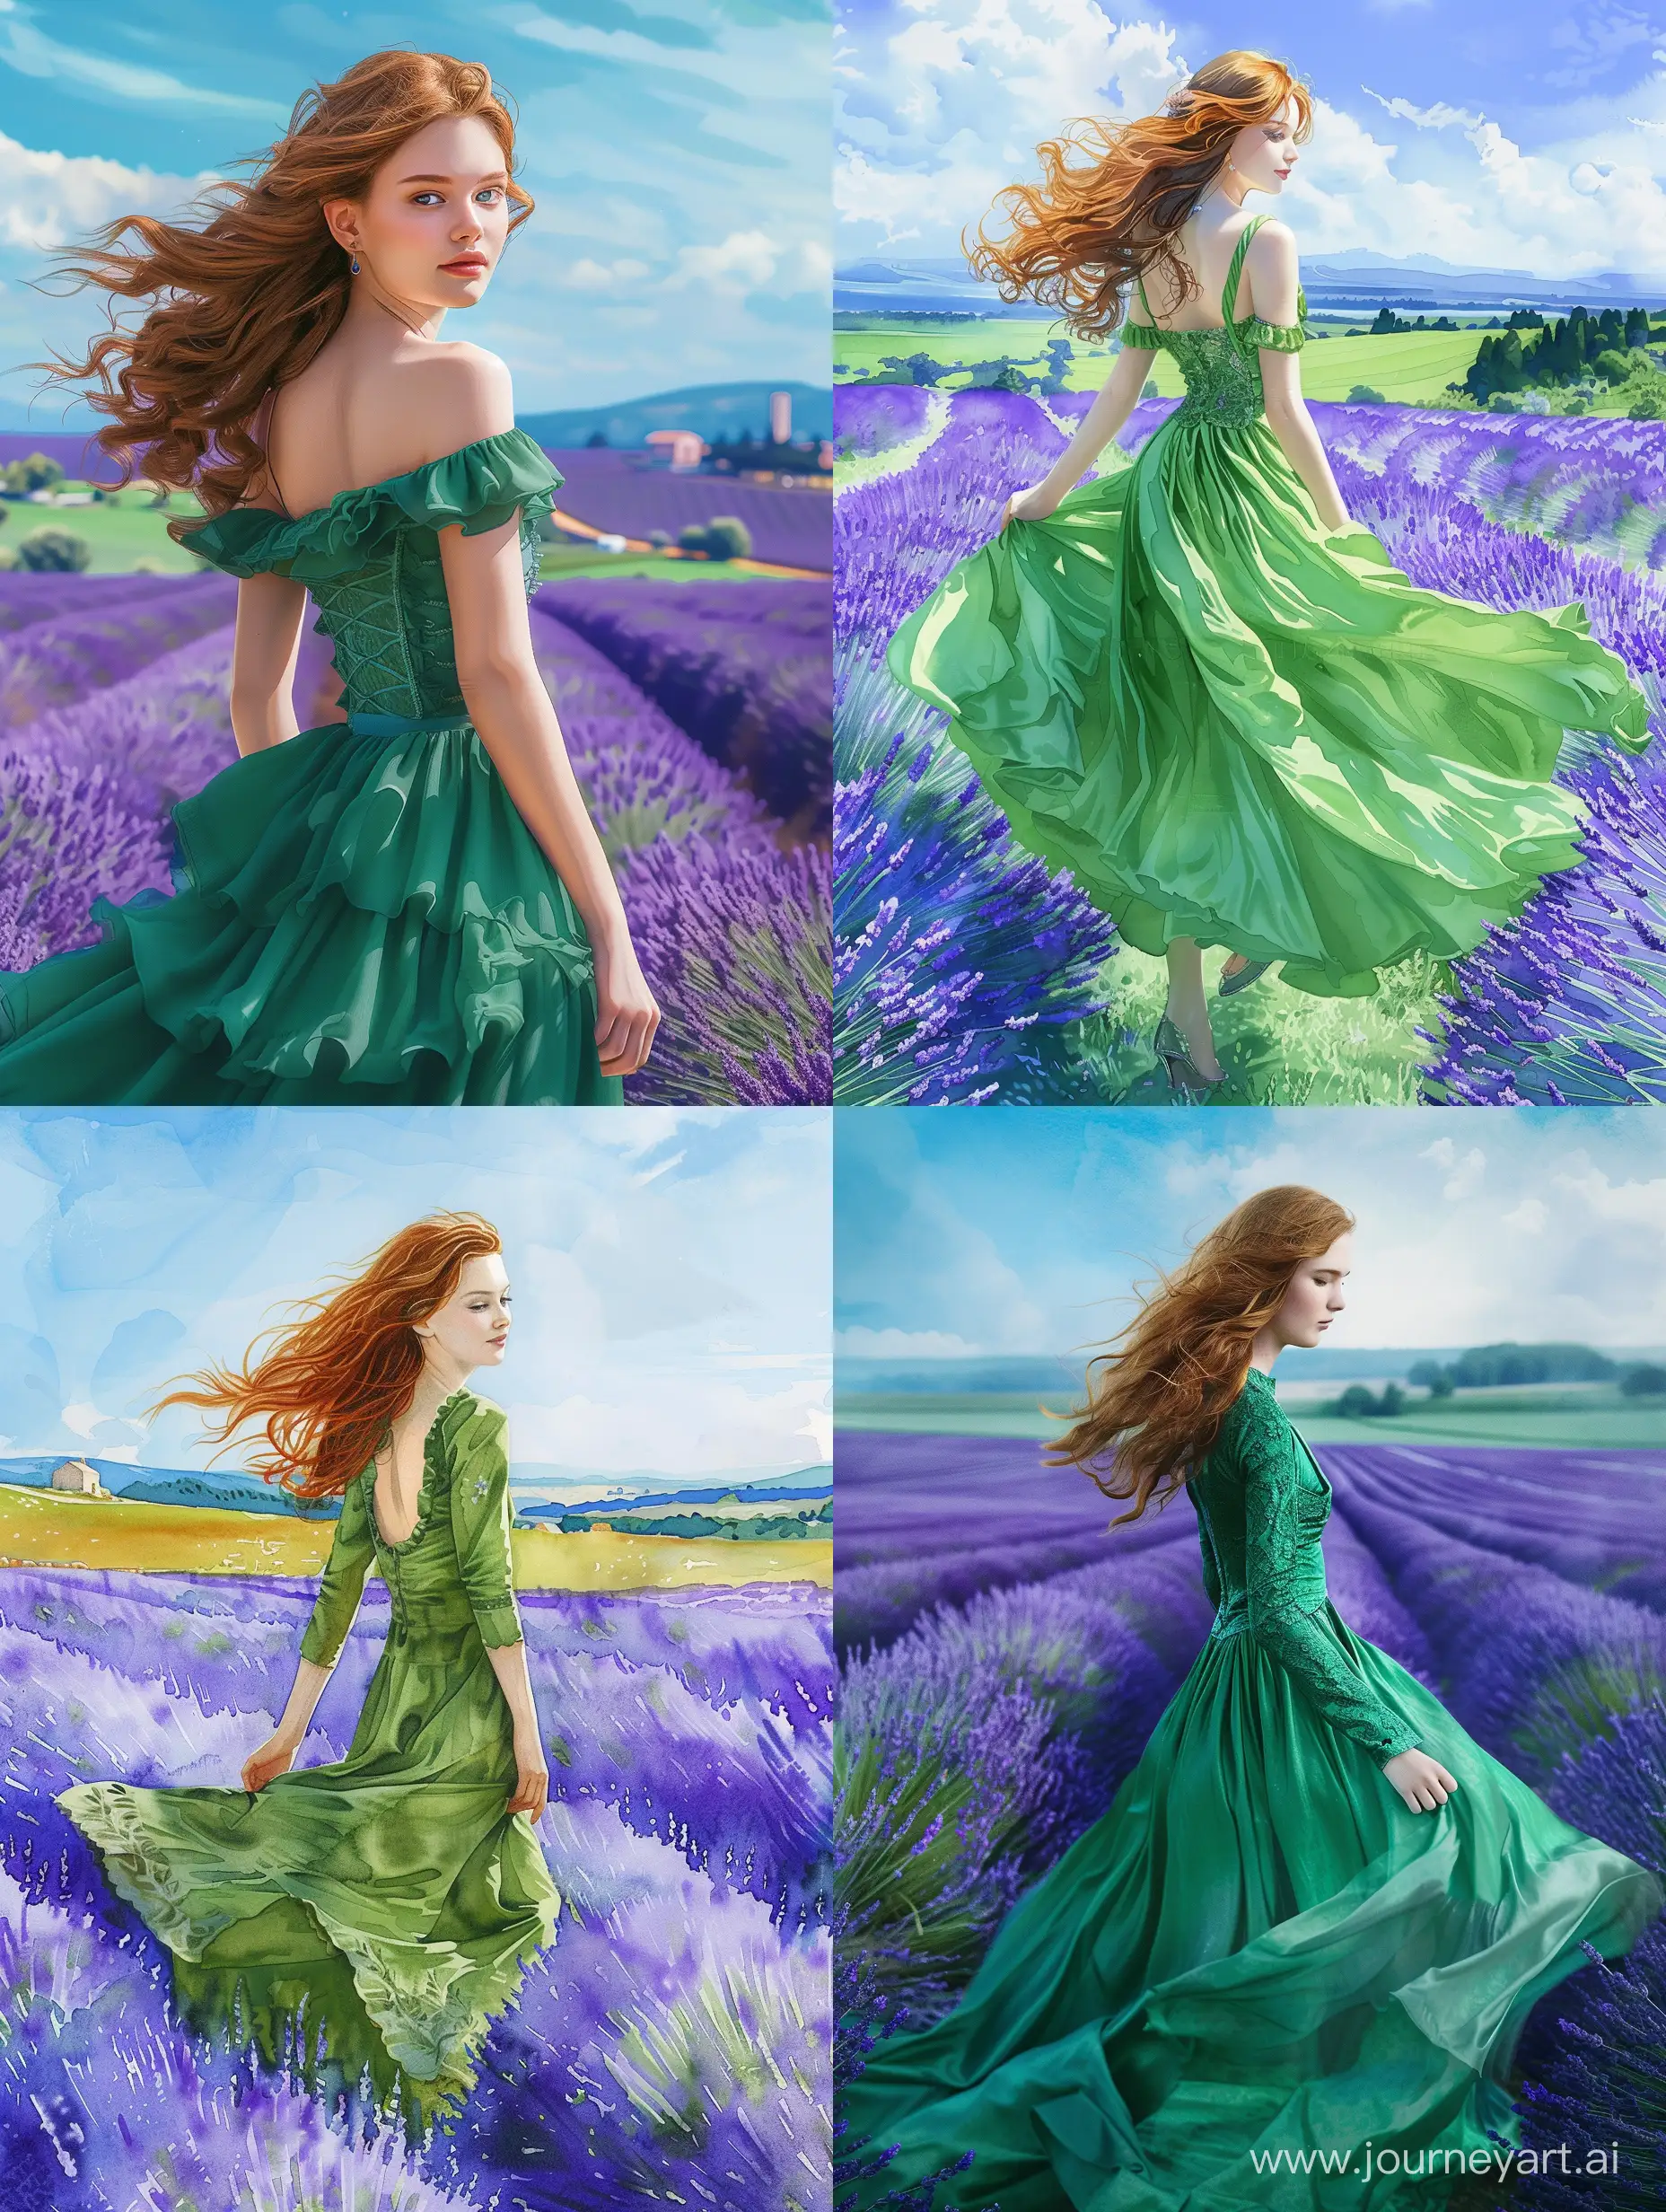 Enchanting-ChestnutHaired-Woman-Strolling-in-a-Lavender-Field